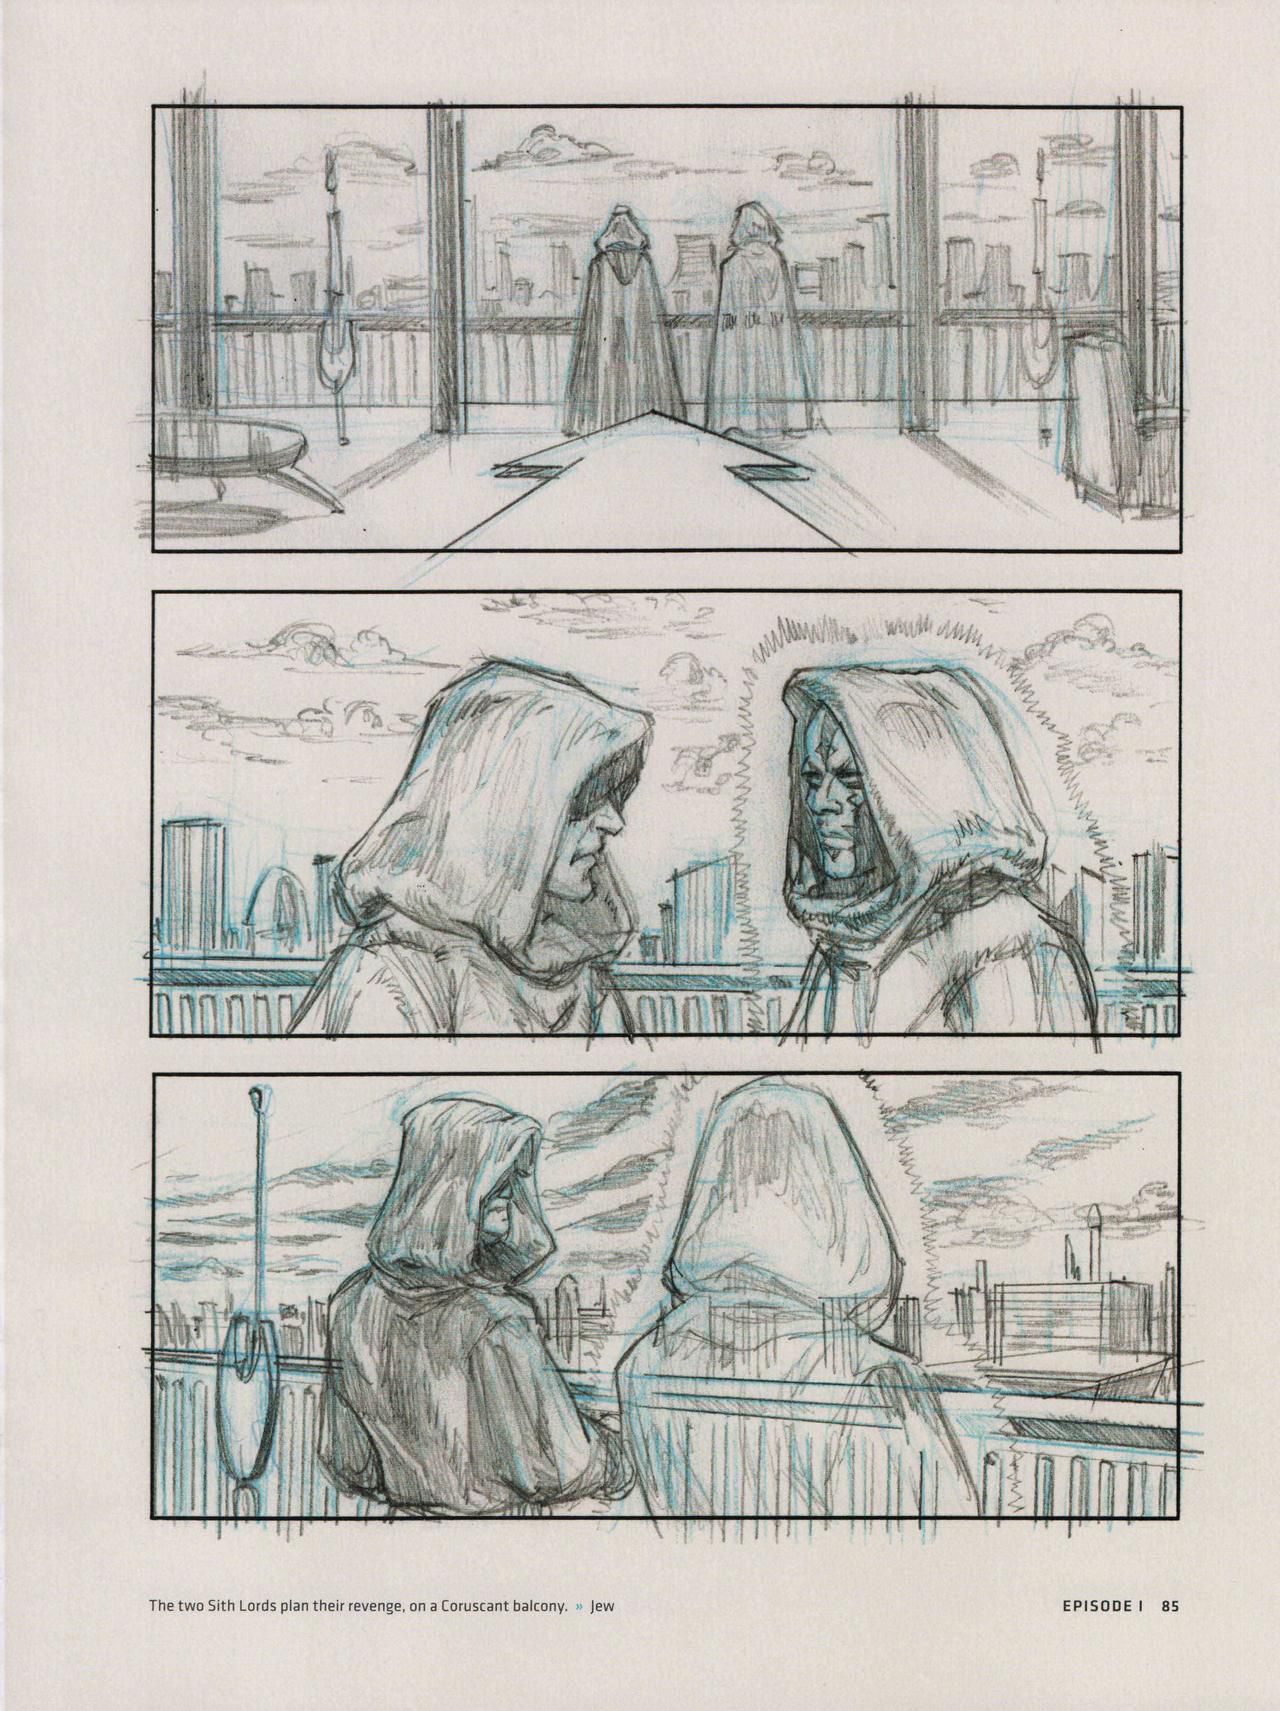 Star Wars Storyboards - The Prequel Trilogy 89